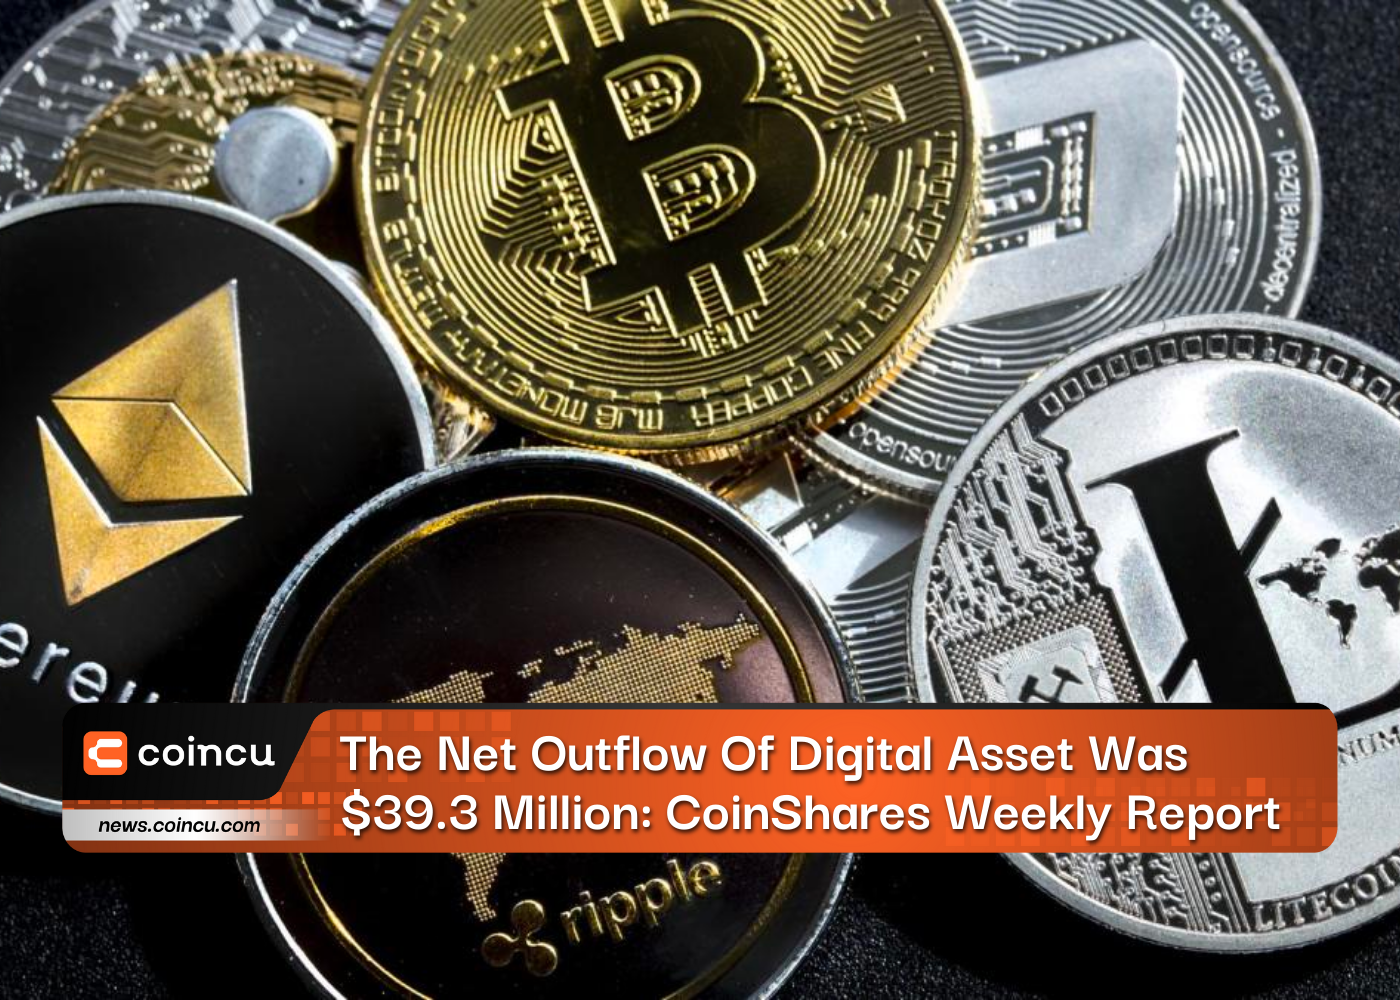 The Net Outflow Of Digital Asset Was $39.3 Million: CoinShares Weekly Report